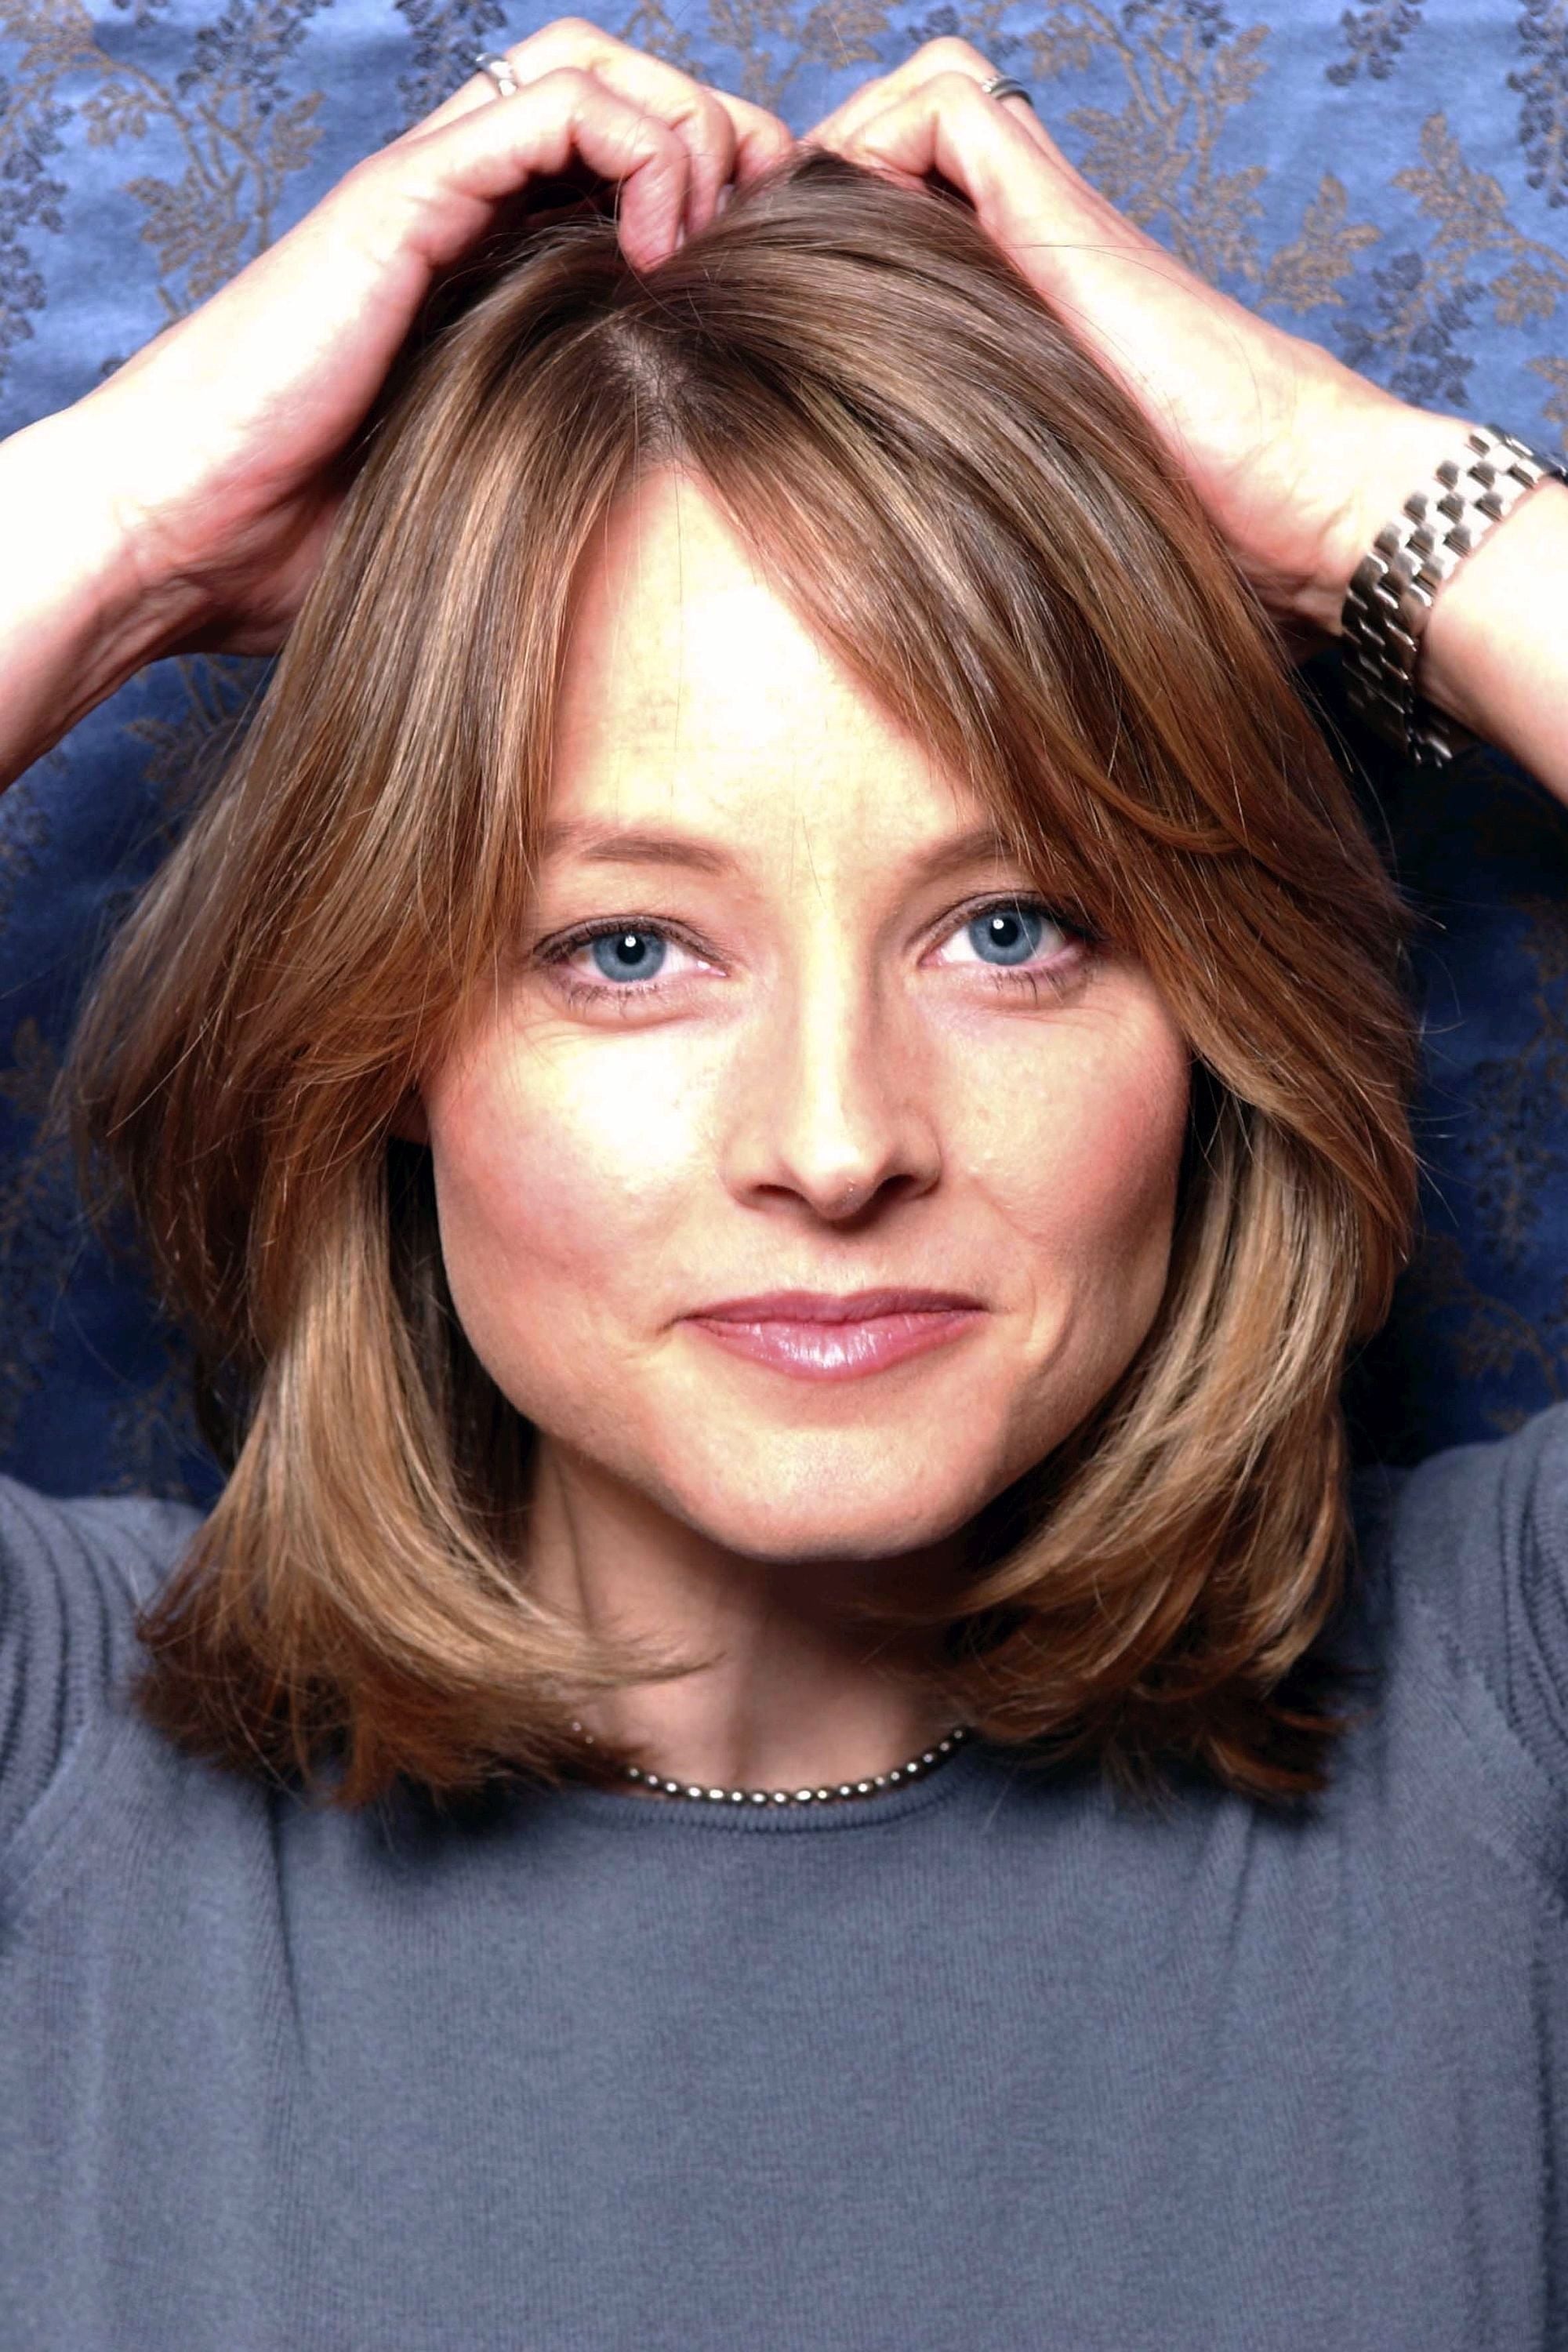 Jodie Foster 60, 1962, Age, Born, Height, Children, Family, Biography